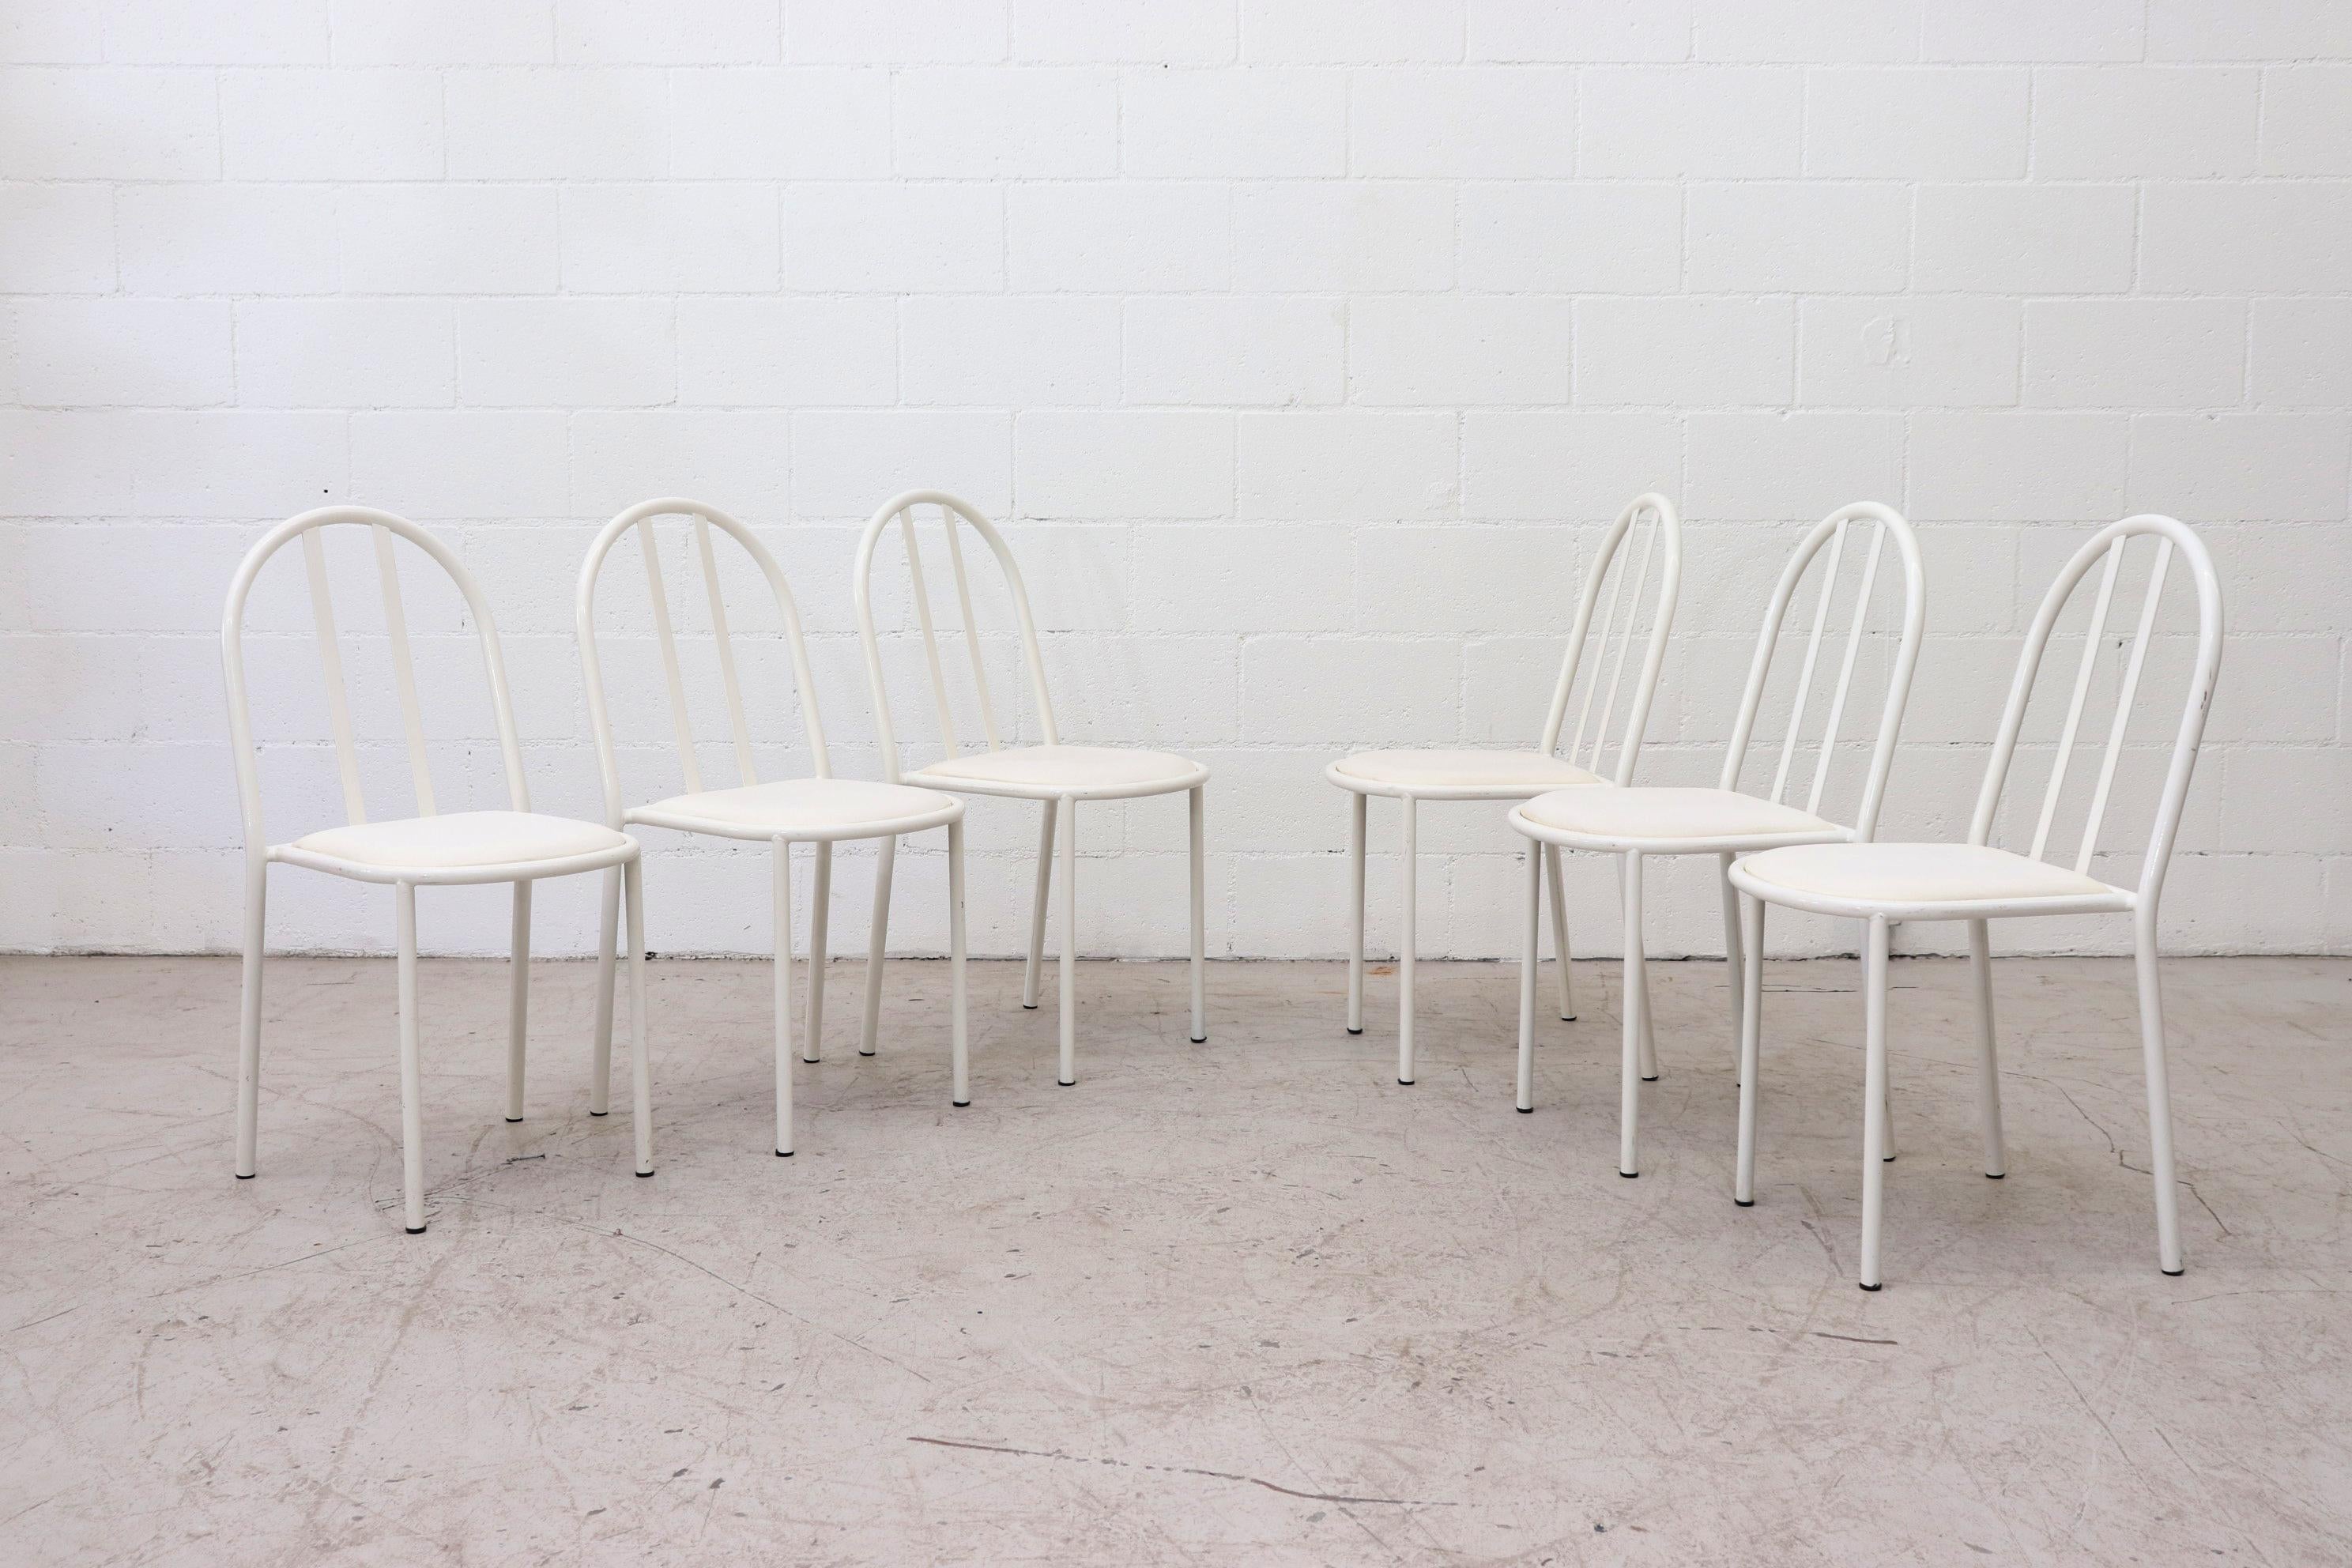 Mod Mallet Stevens and Thonet style white enameled metal stacking chairs with white vinyl seat cushion. In original condition with visible wear. Some of the seating may have small tears. Wear is consistent with their age and use. Lead time from time